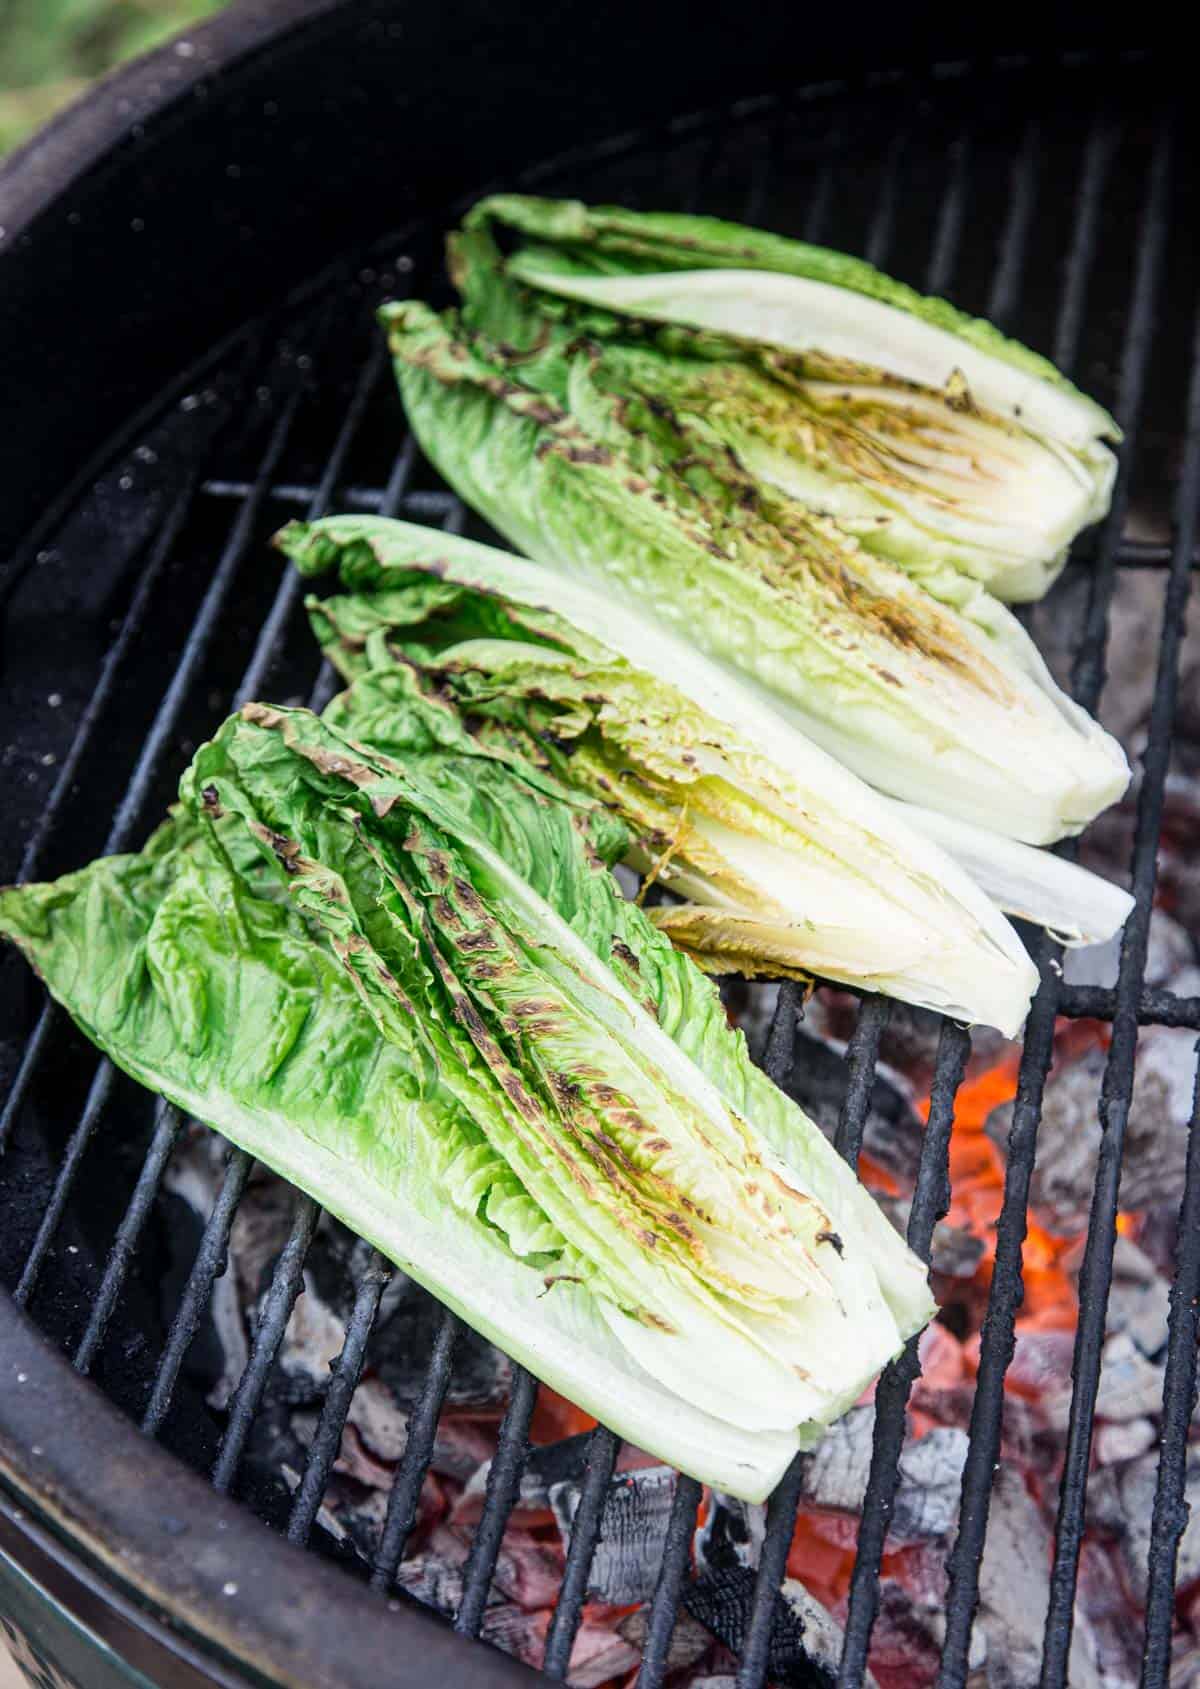 Romaine Lettuce cooking on the grill